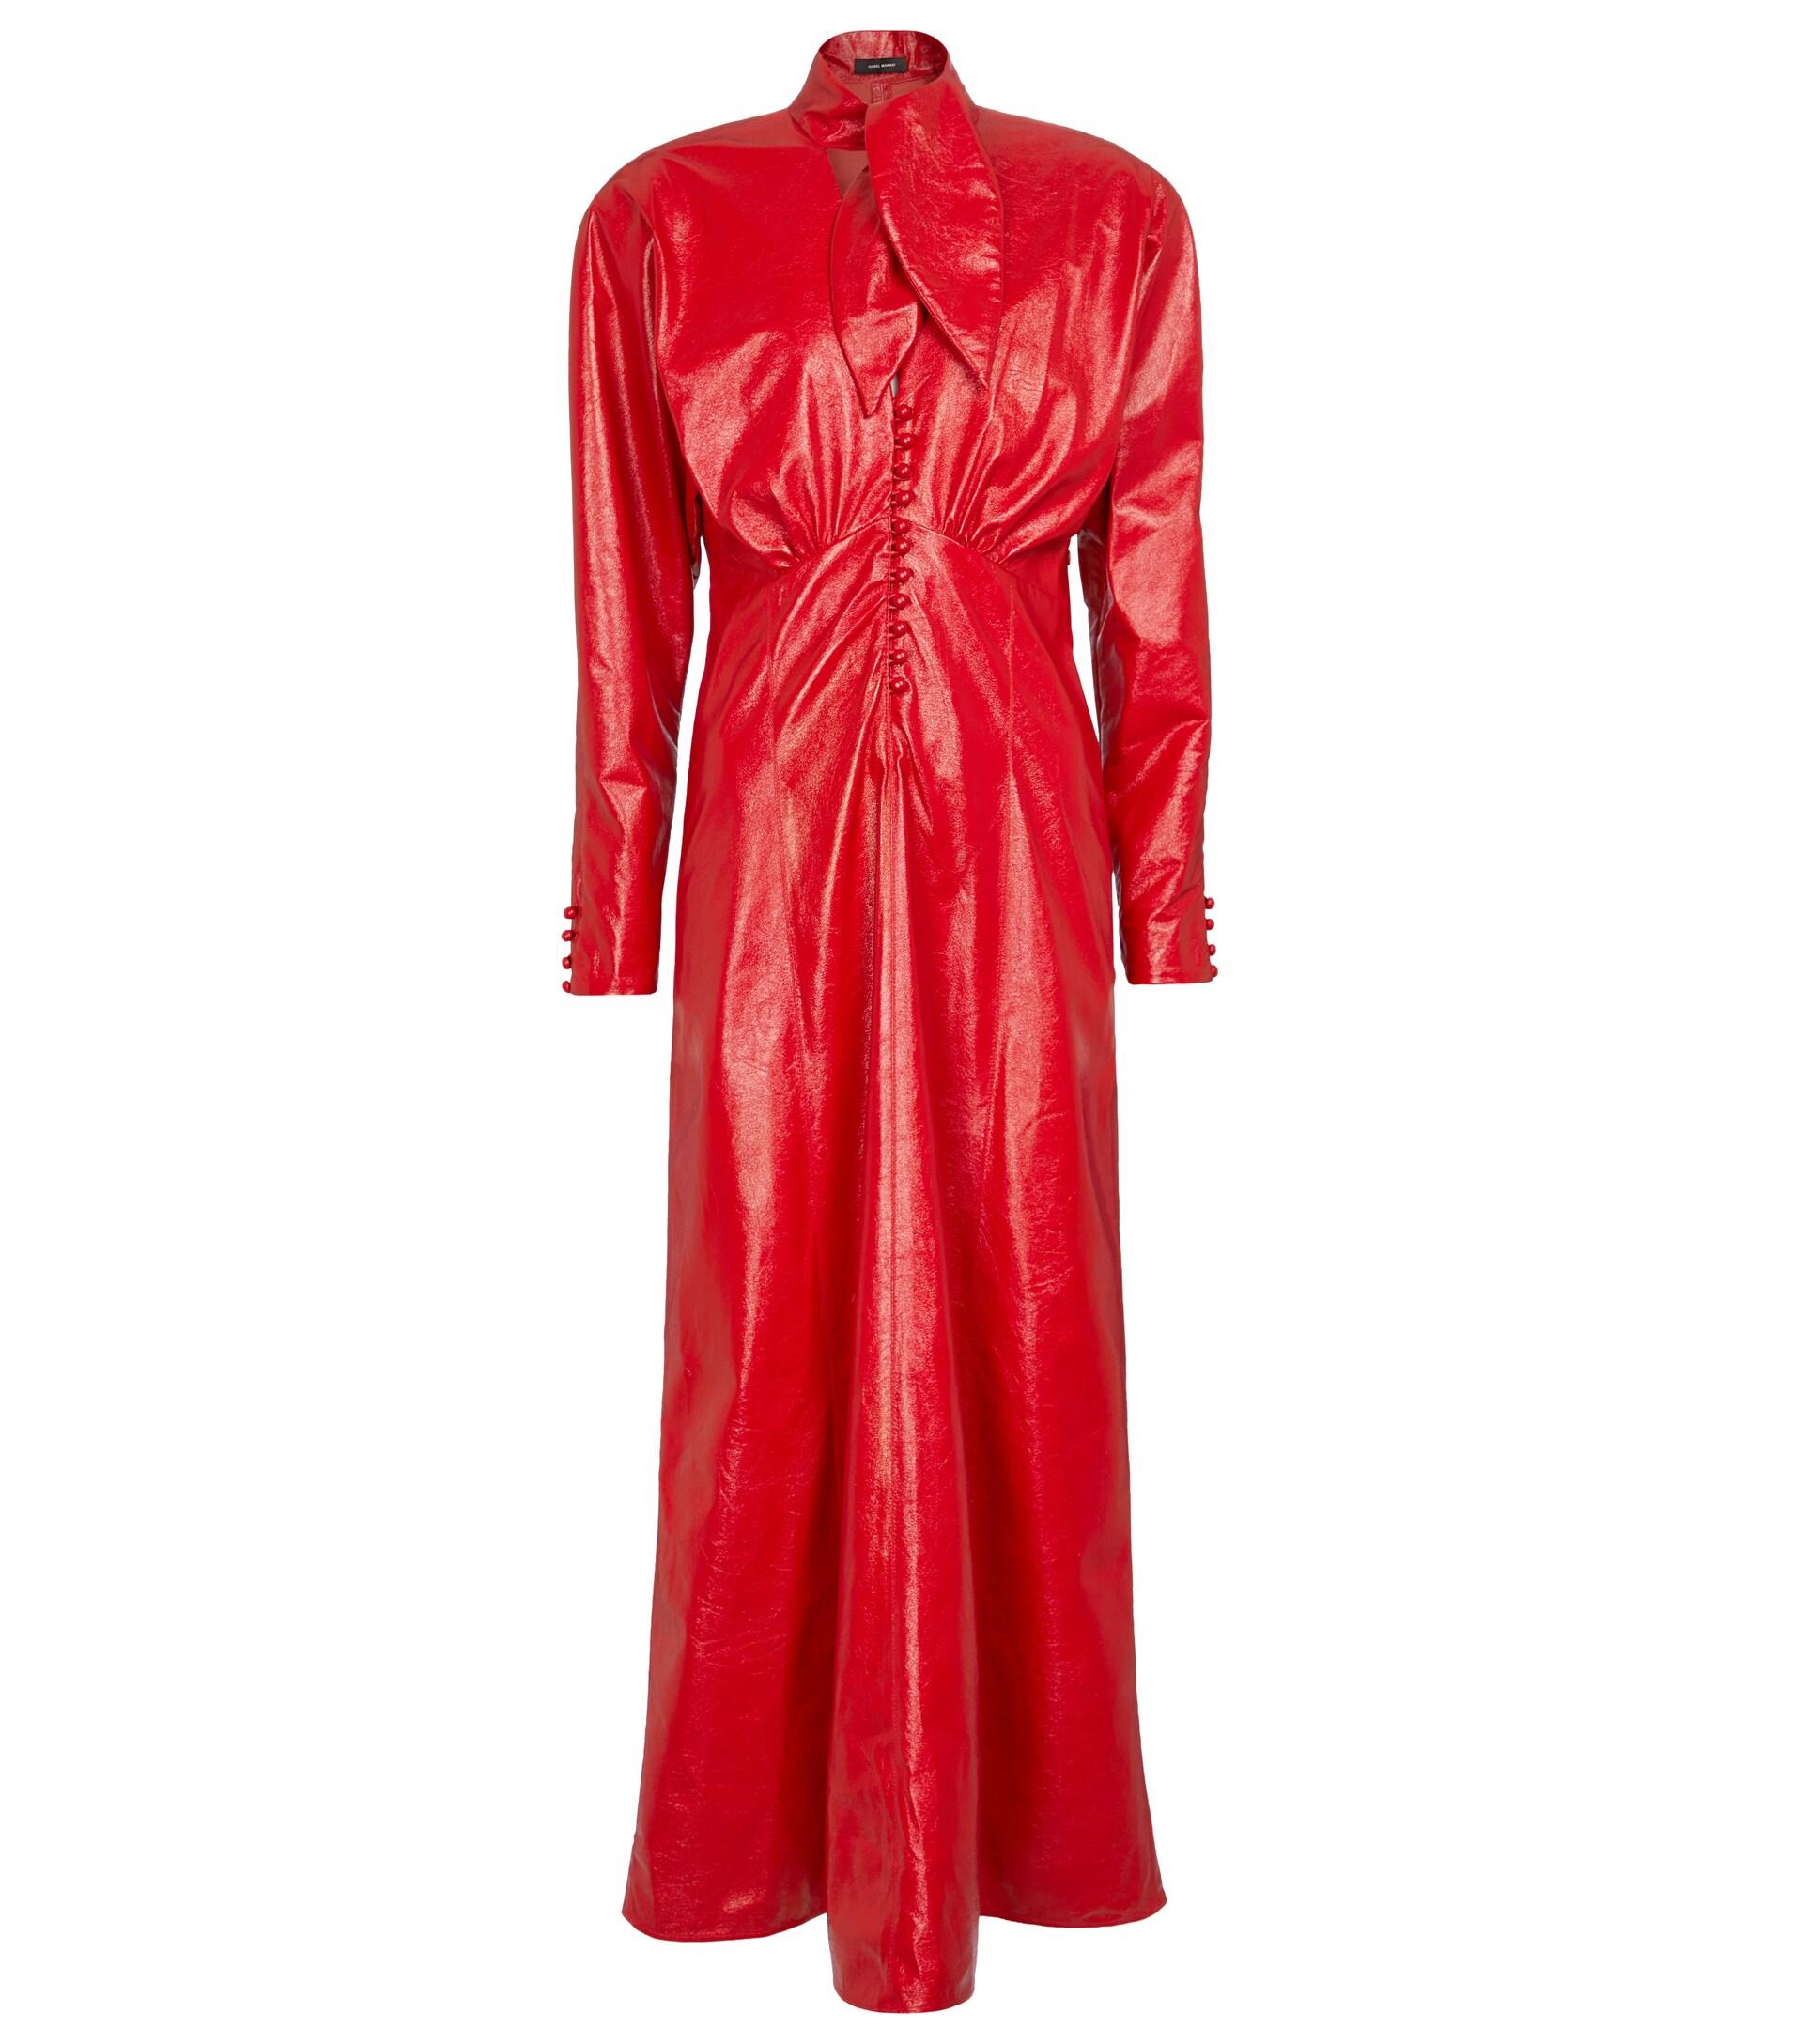 Isabel Marant Genazuli Faux Leather Maxi Dress in Red | Lyst